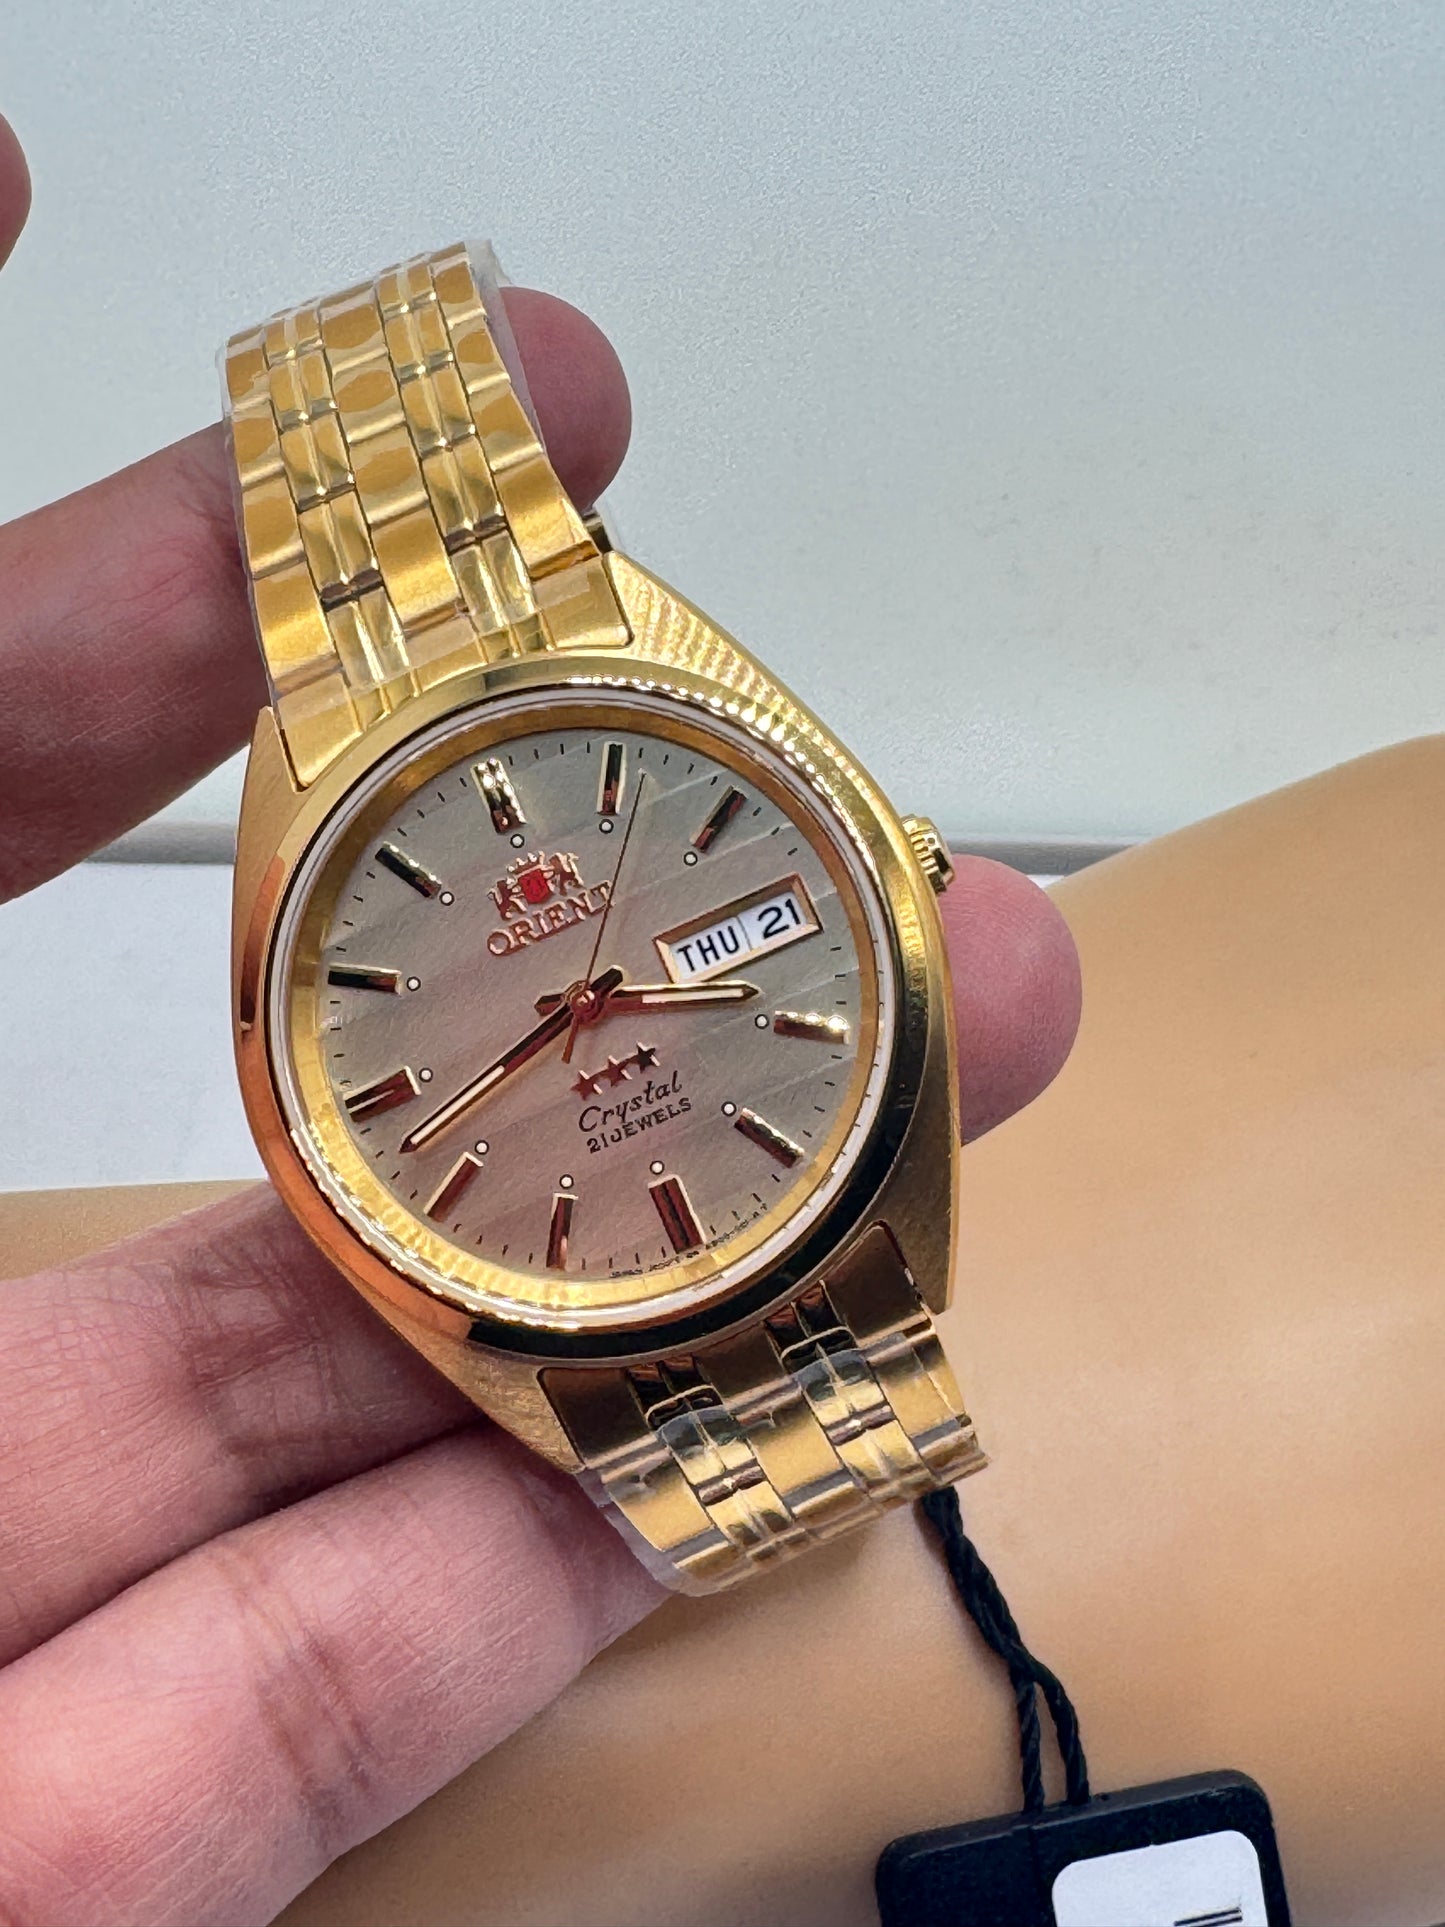 Orient Automatic Movement Watch in Goldtone Color ,37mm Diameter Stainless Steel New Item Fits  up to 8 inches LONG  Automatic Movement  Goldtone Color  Brand New Item